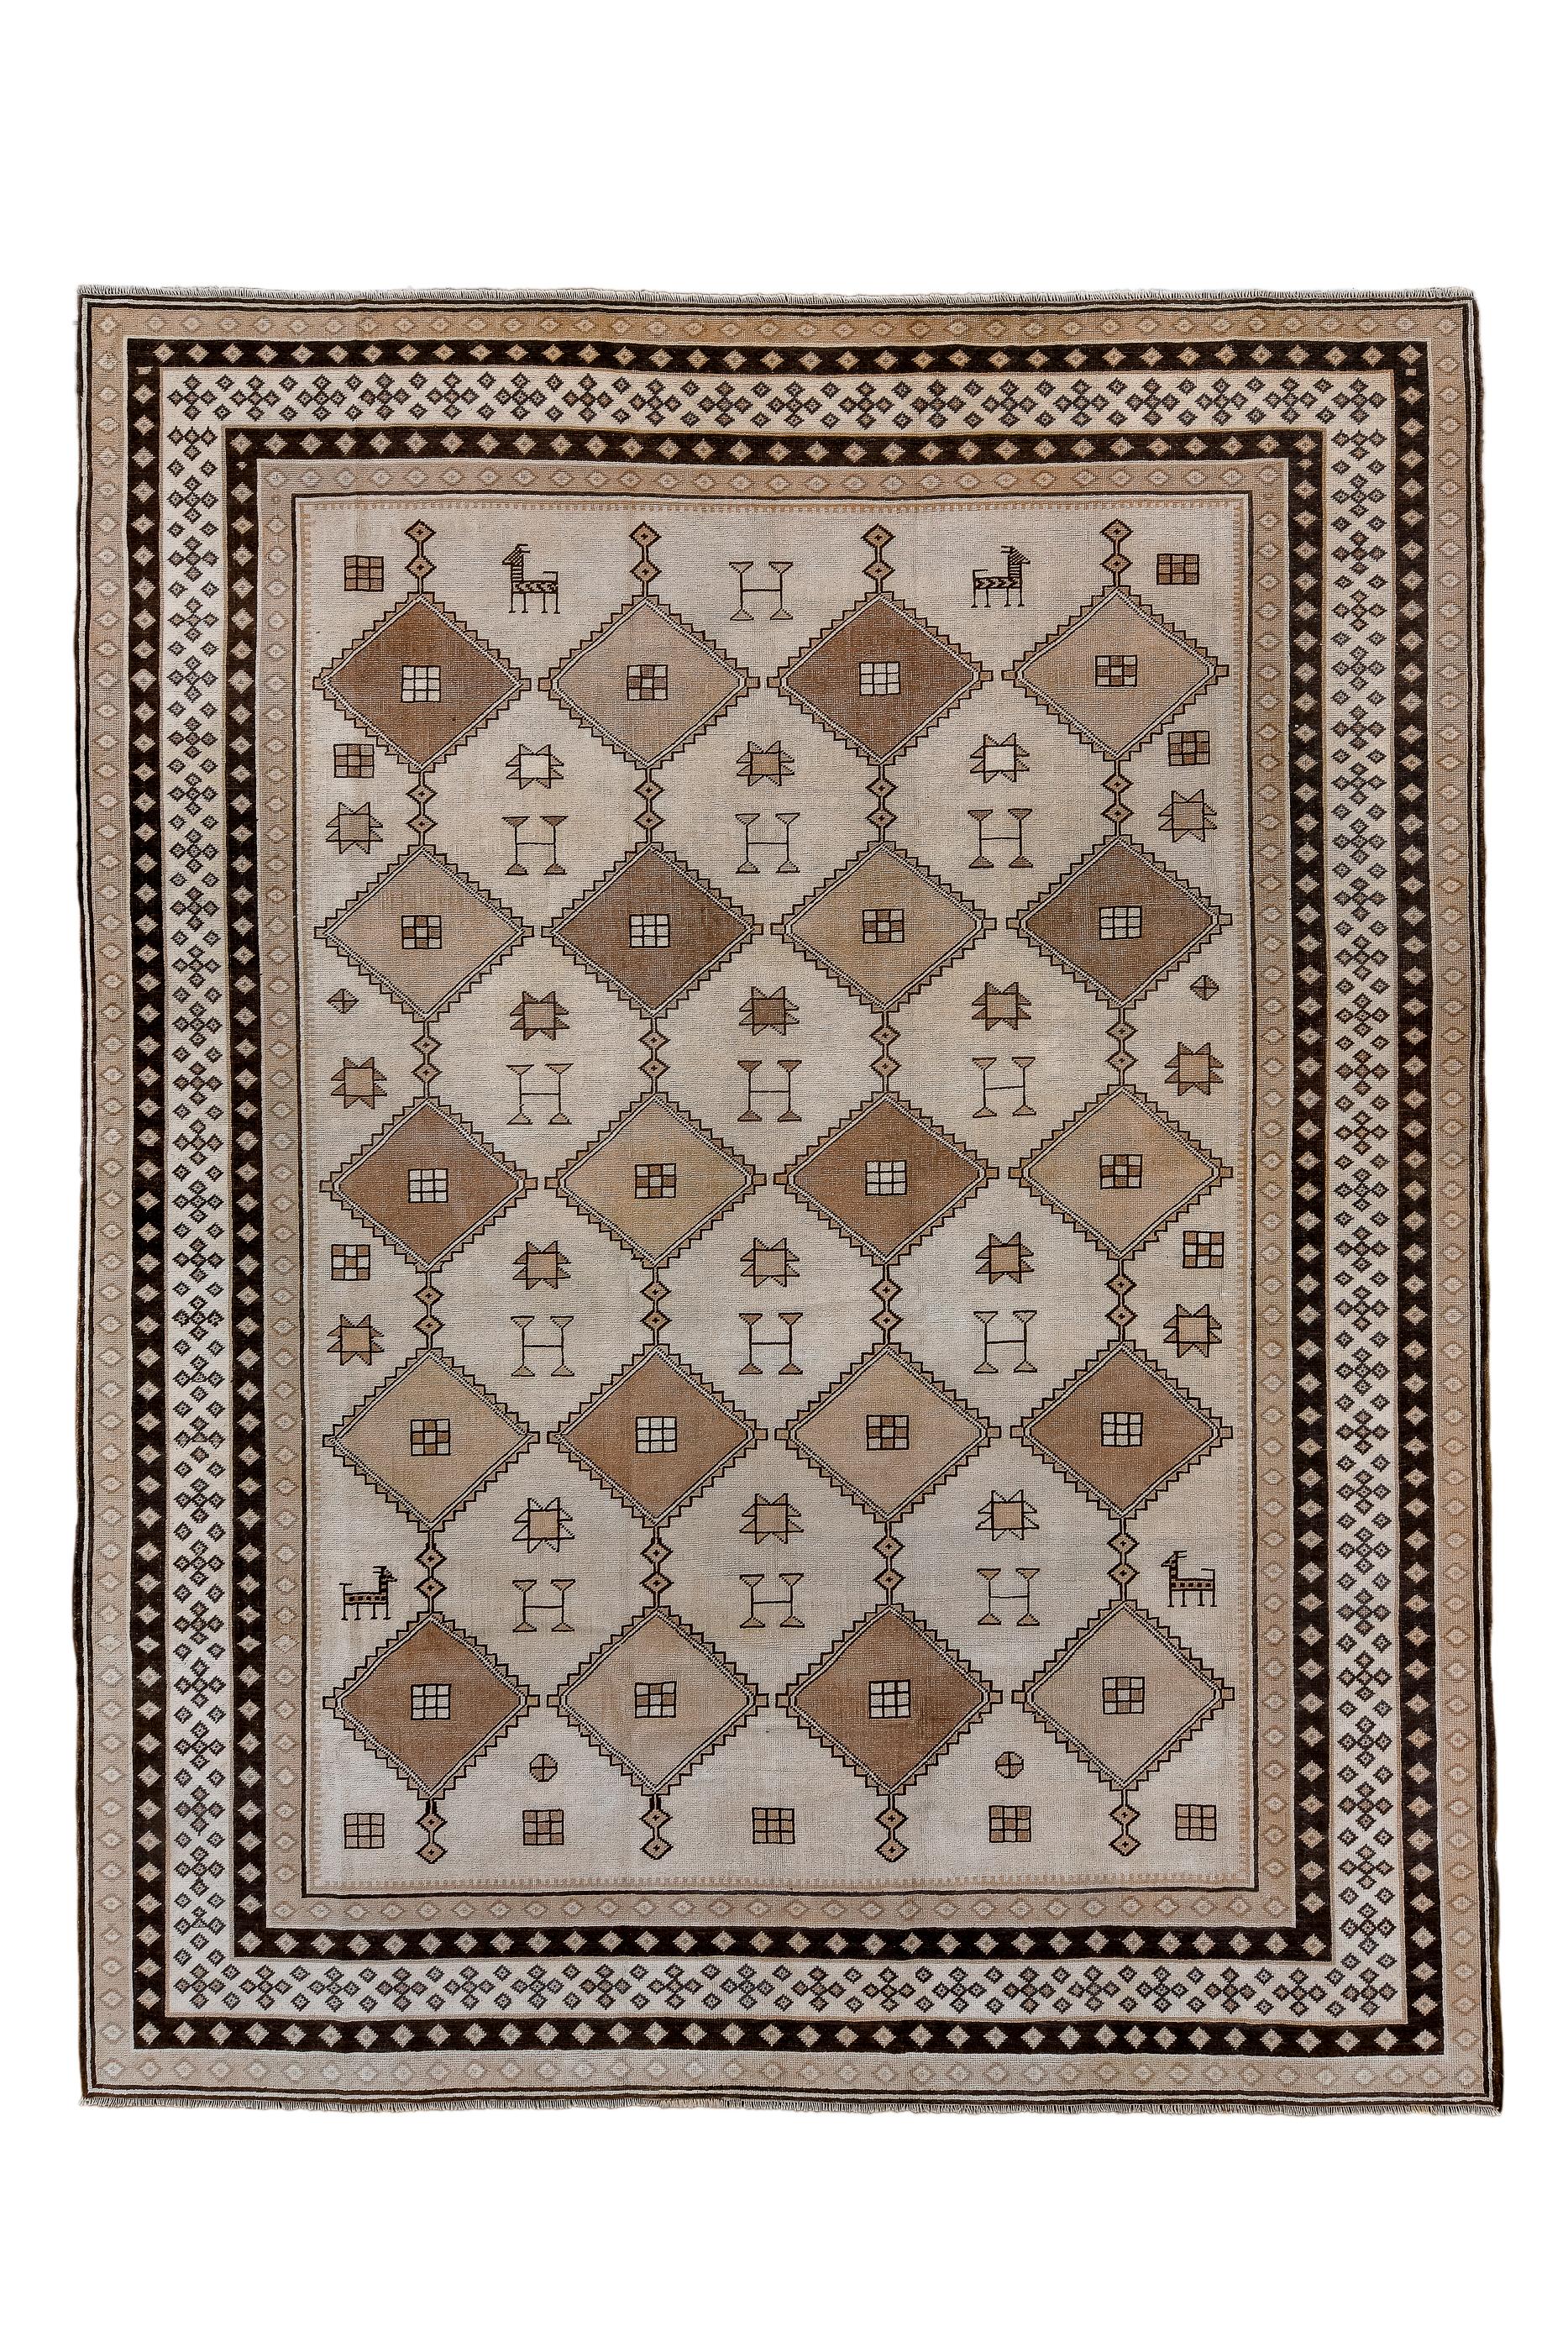 The beige sand field features four pole medallions which together form a diamond and hexagon lattice, with stars, H’s and small animals in the defined reserves. Ivory main border of small crosses. Well-balanced with lattice free-floating in all